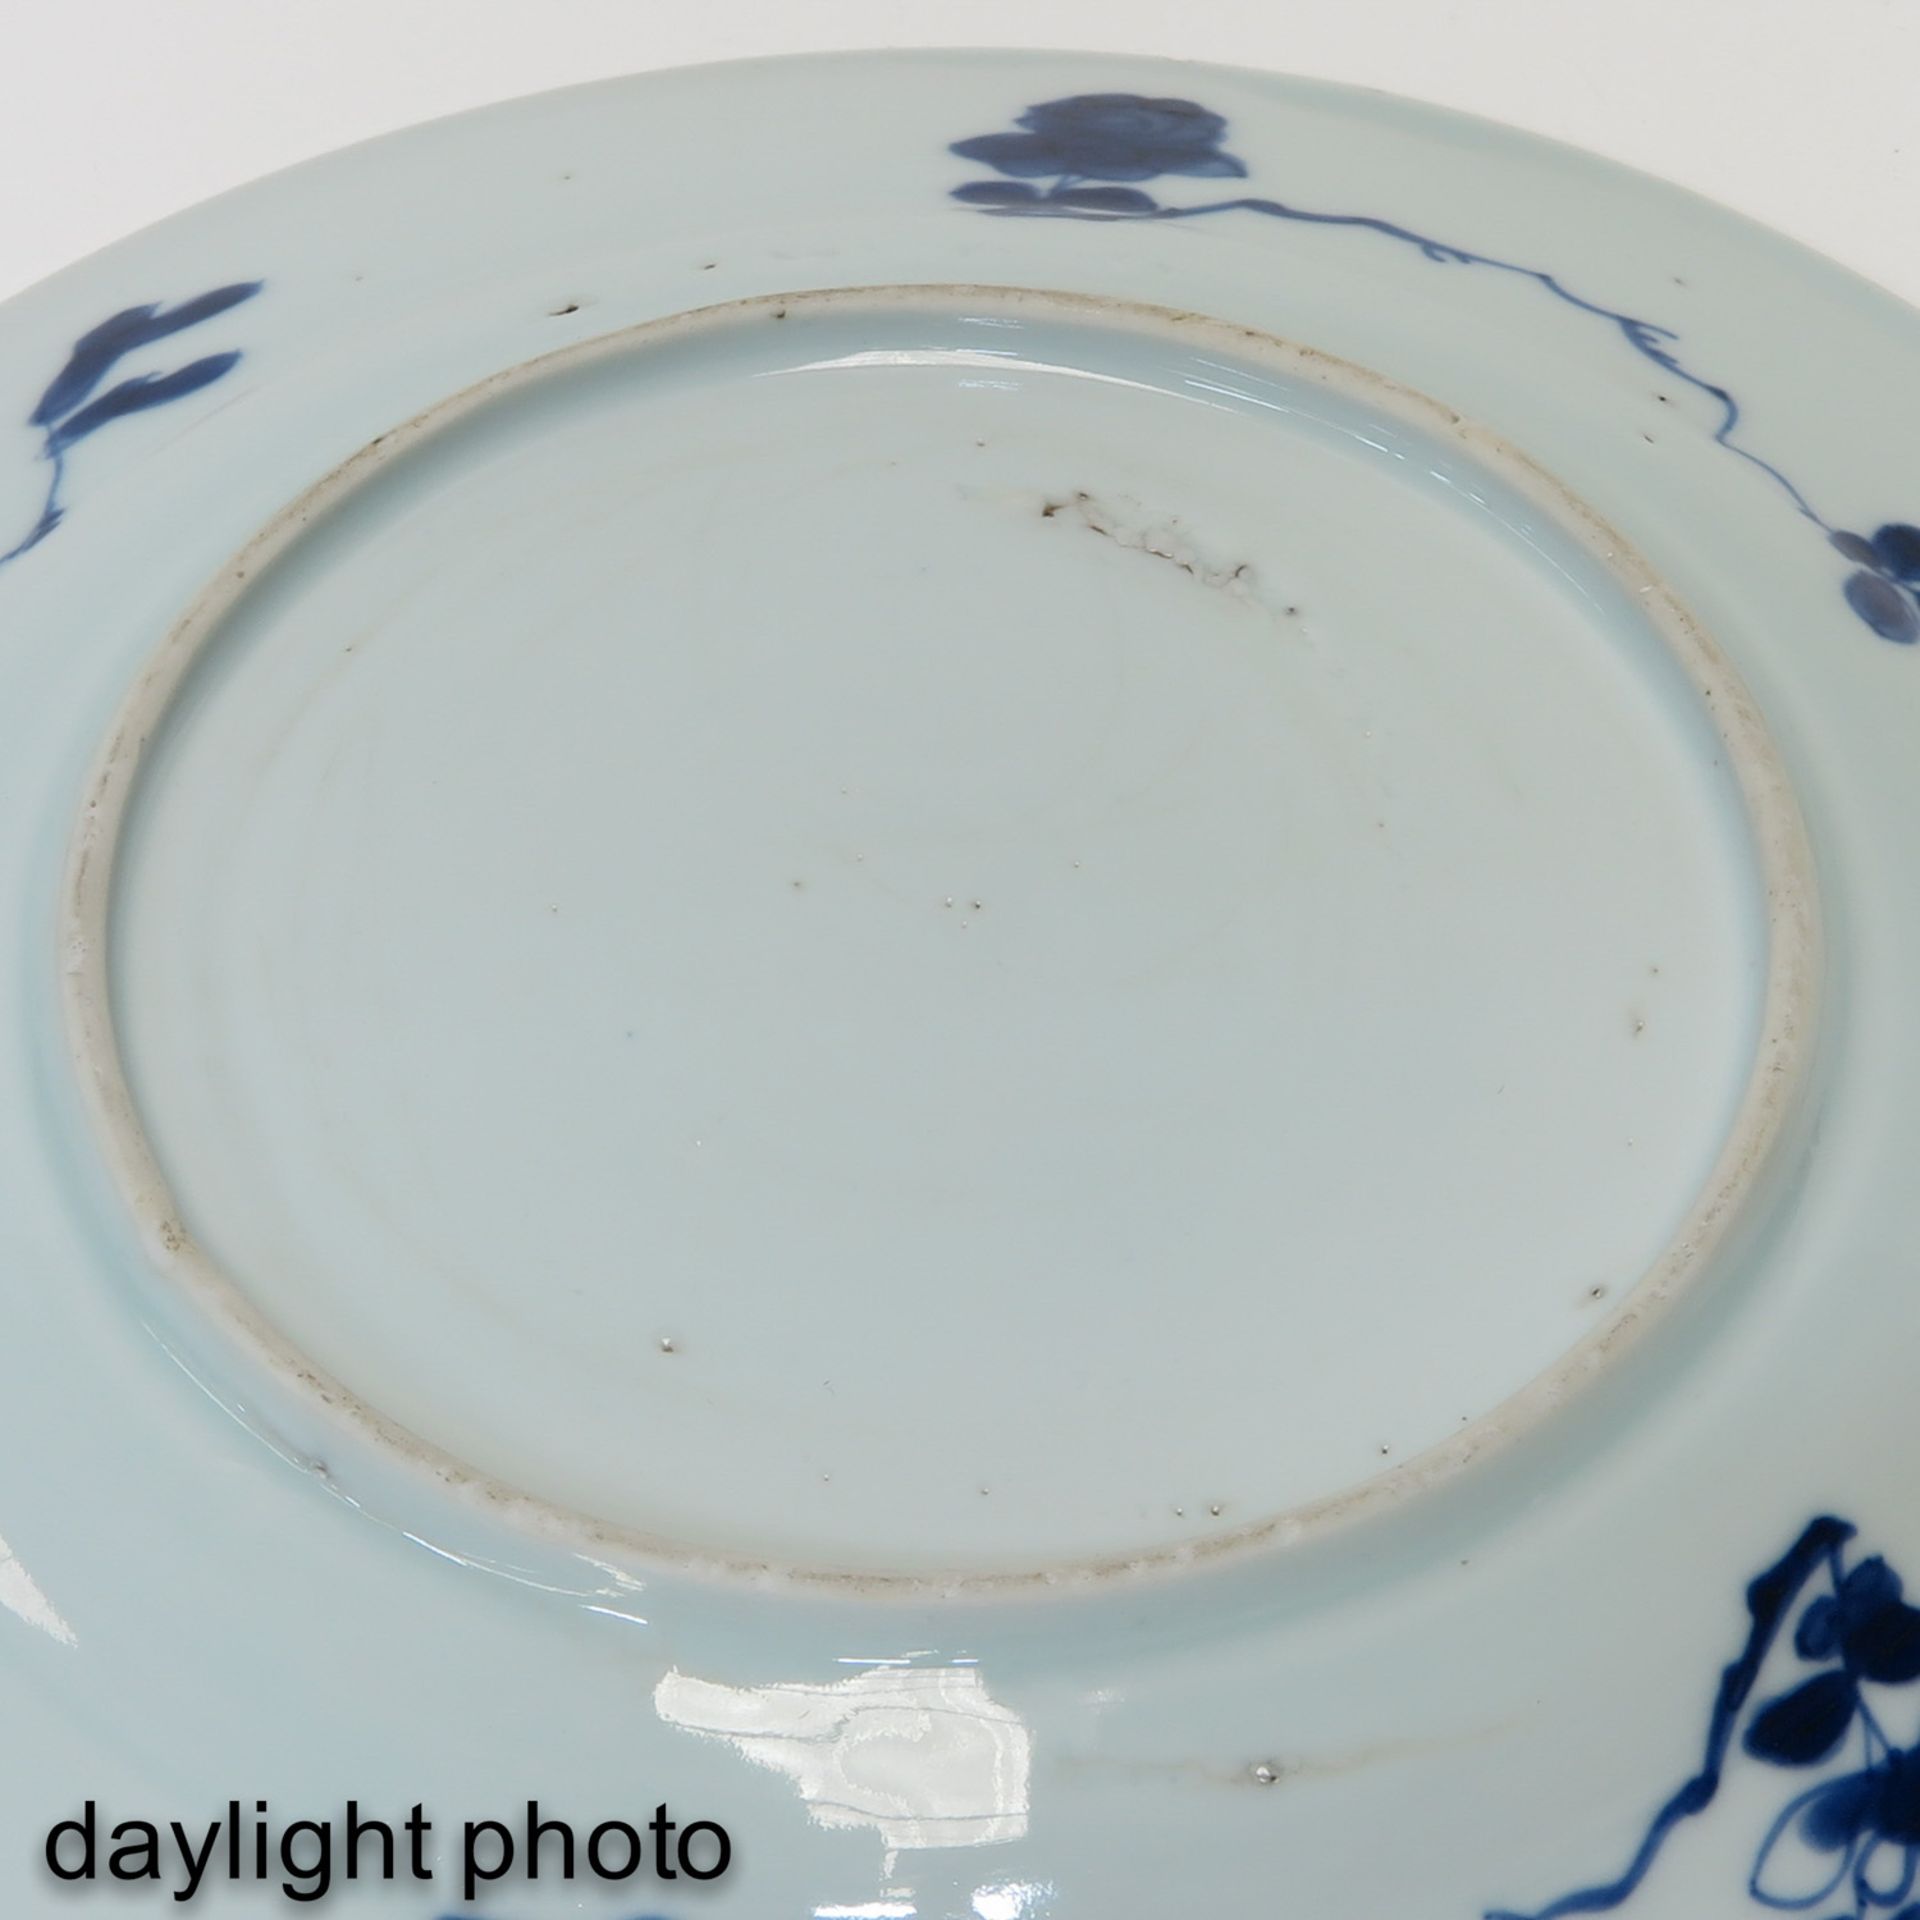 A Pair of Blue and White Plates - Image 8 of 10